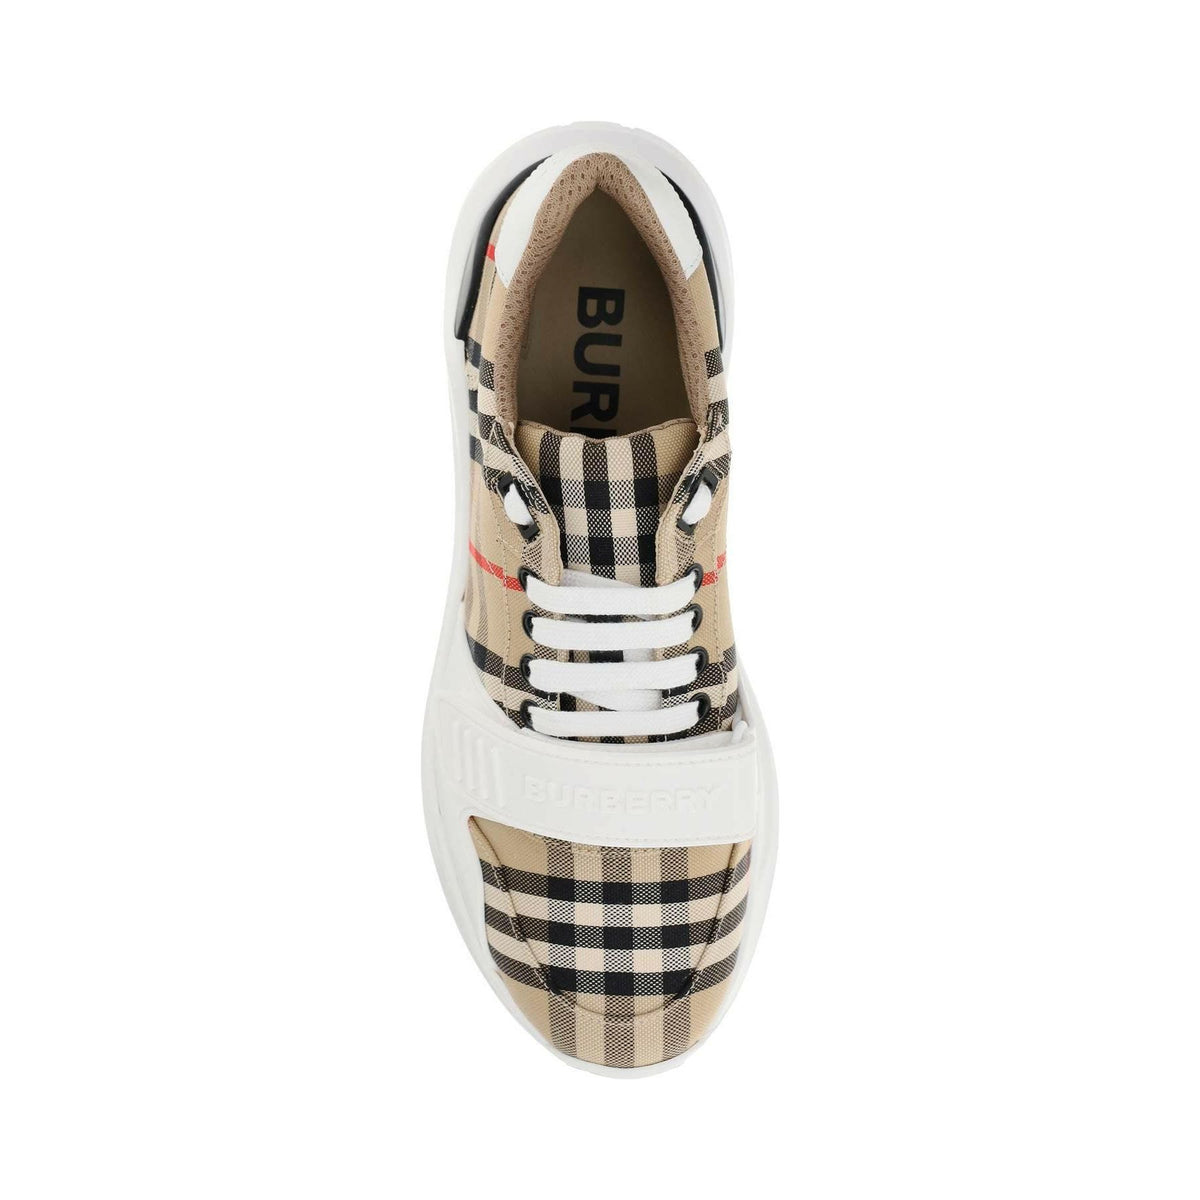 Archive Beige Regis Check, Suede and Leather Sneakers BURBERRY JOHN JULIA.